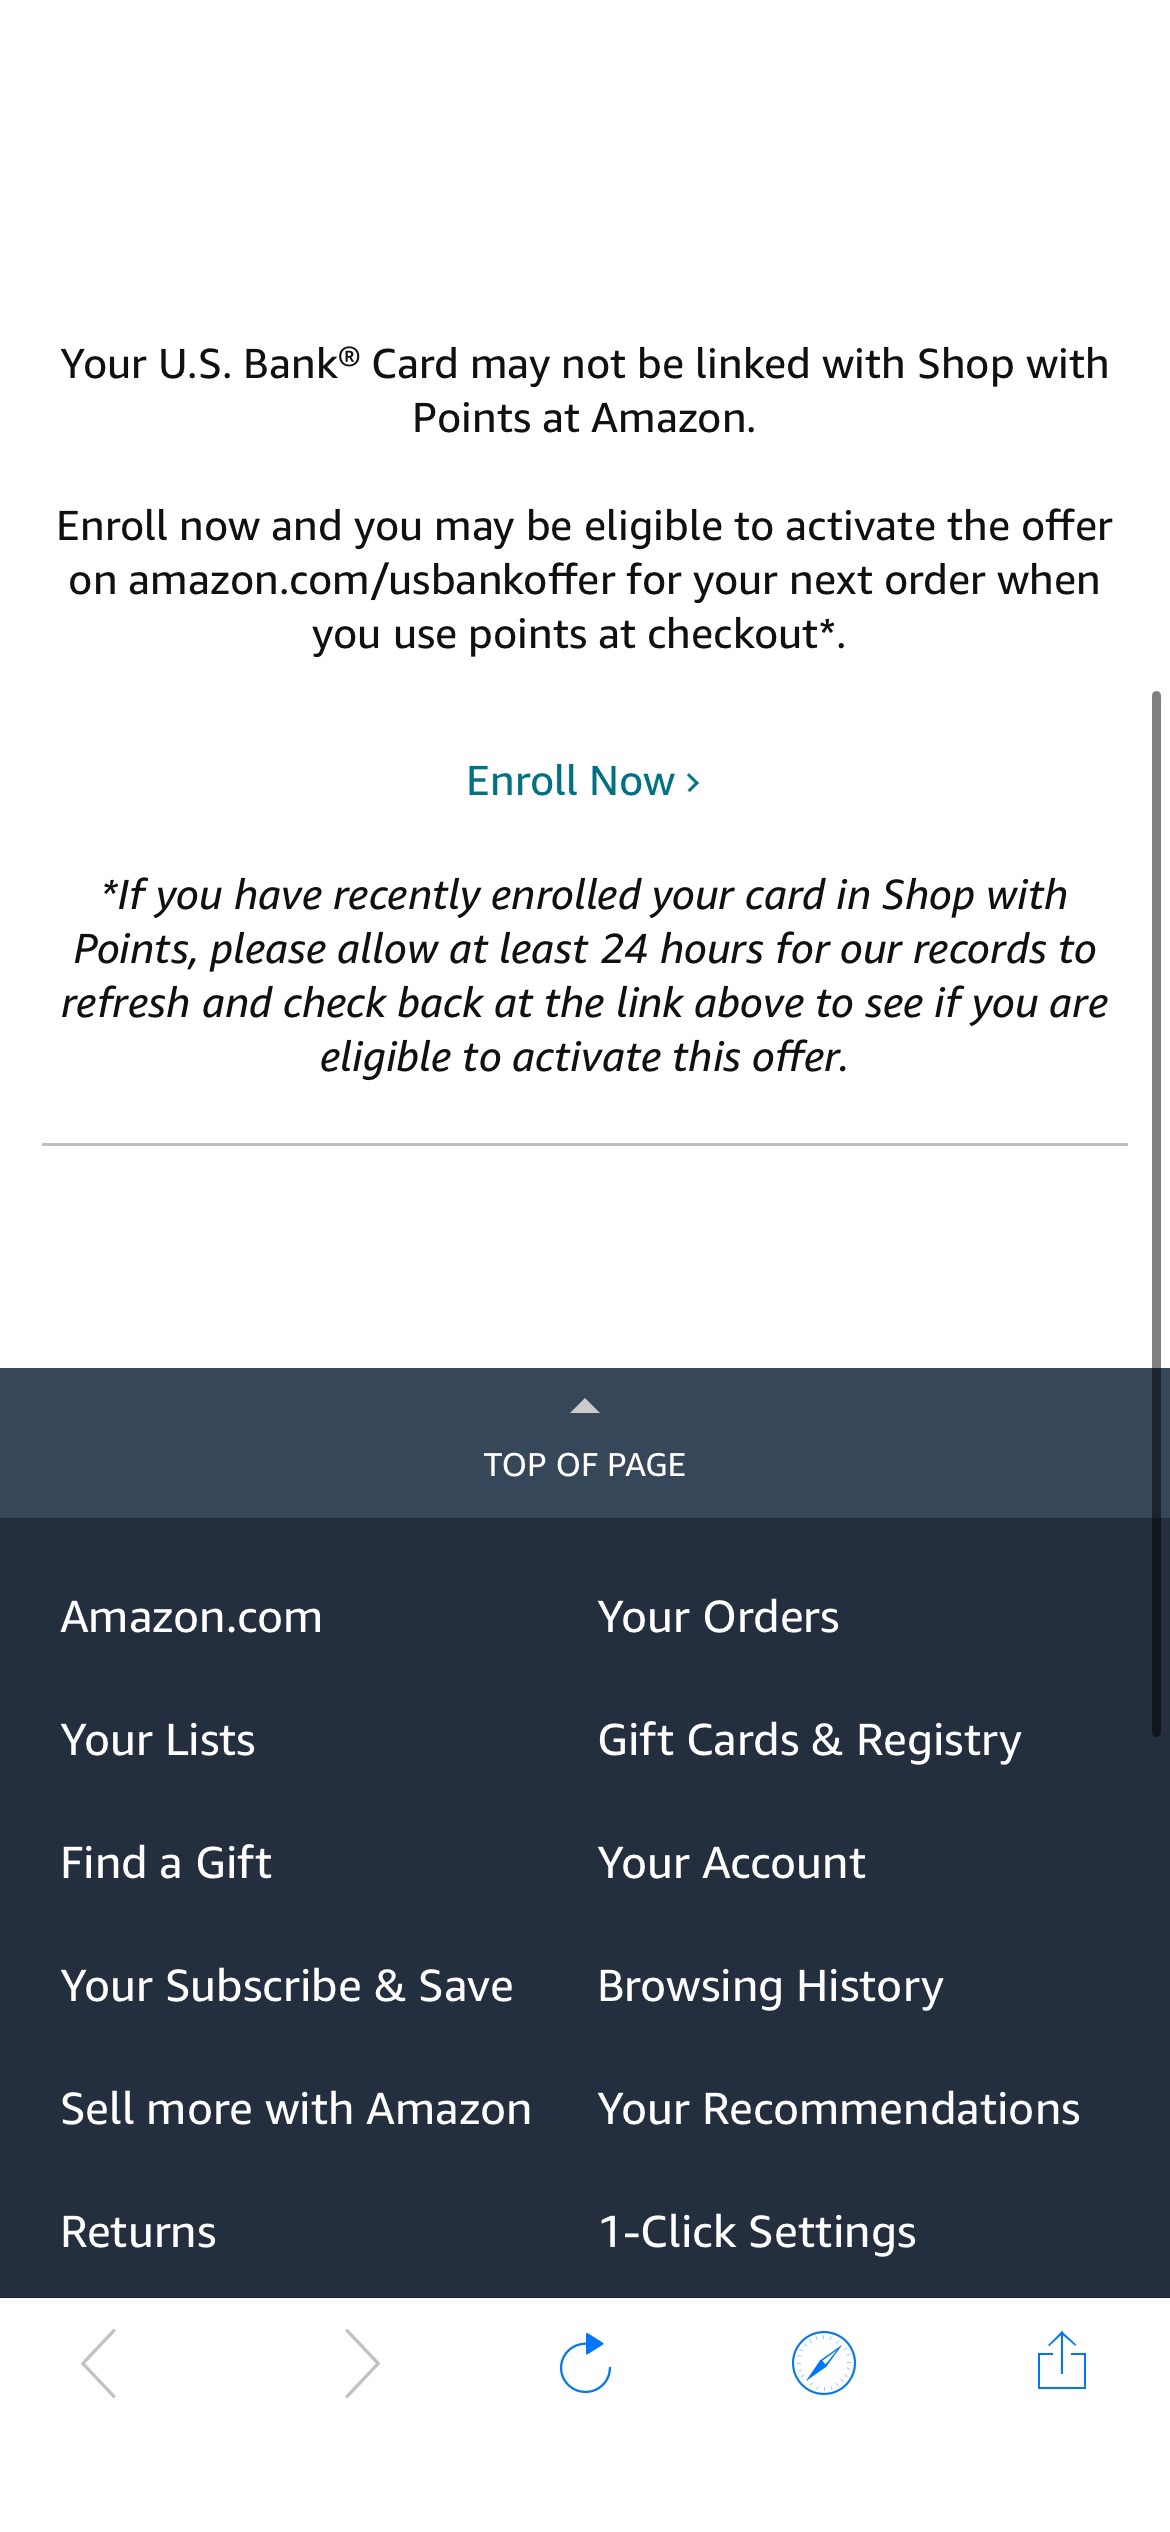 Amazon.com: US Bank Offer: Credit & Payment Cards